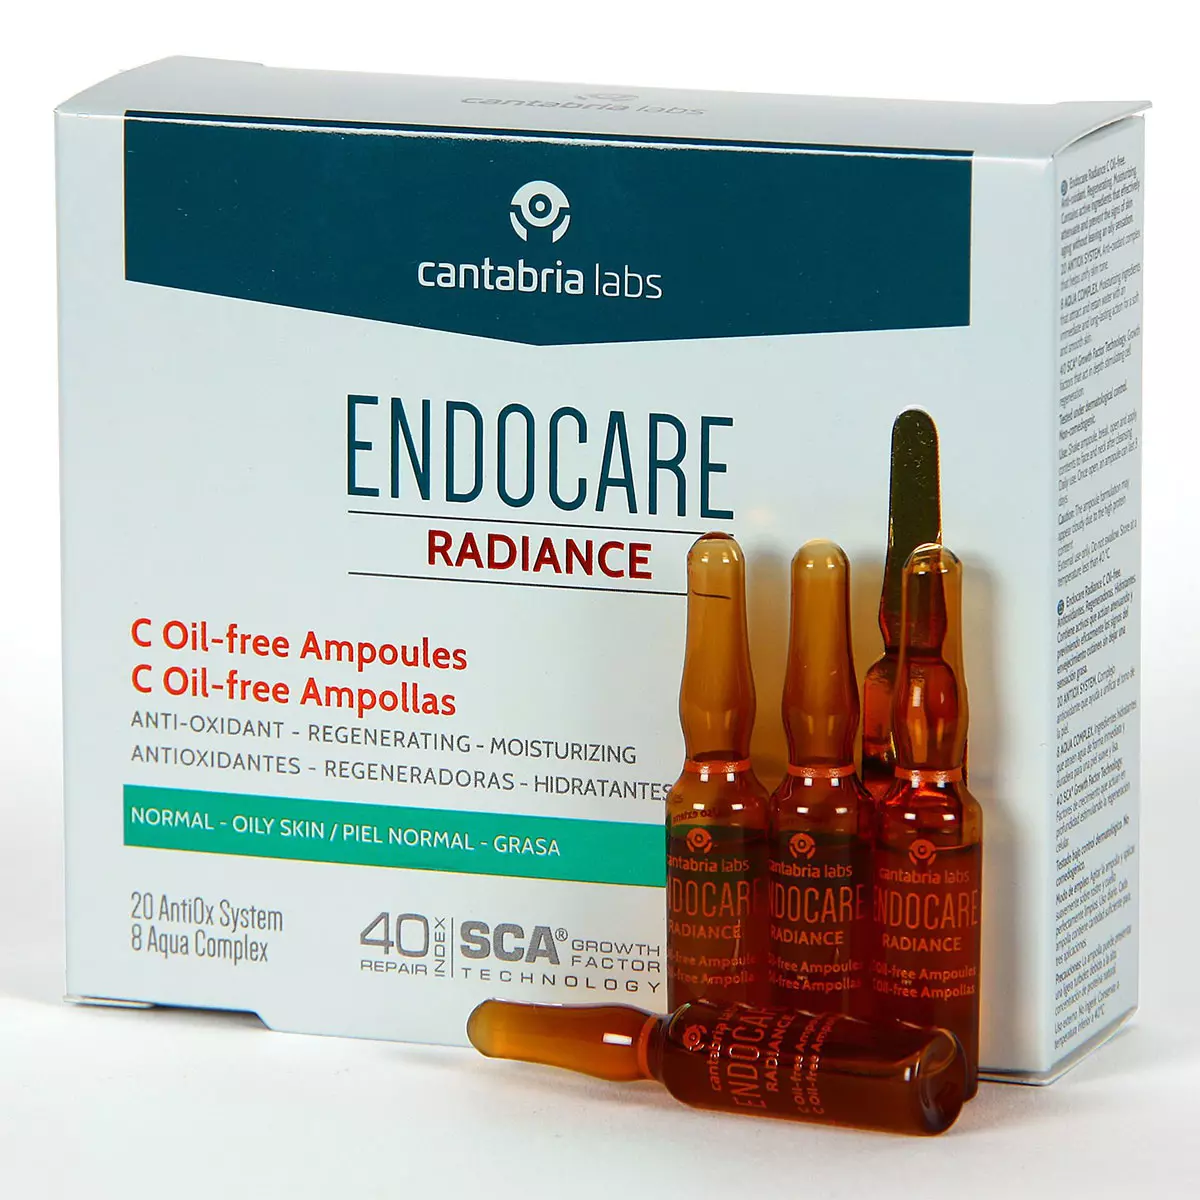 Endocare radiance 10 ampollas